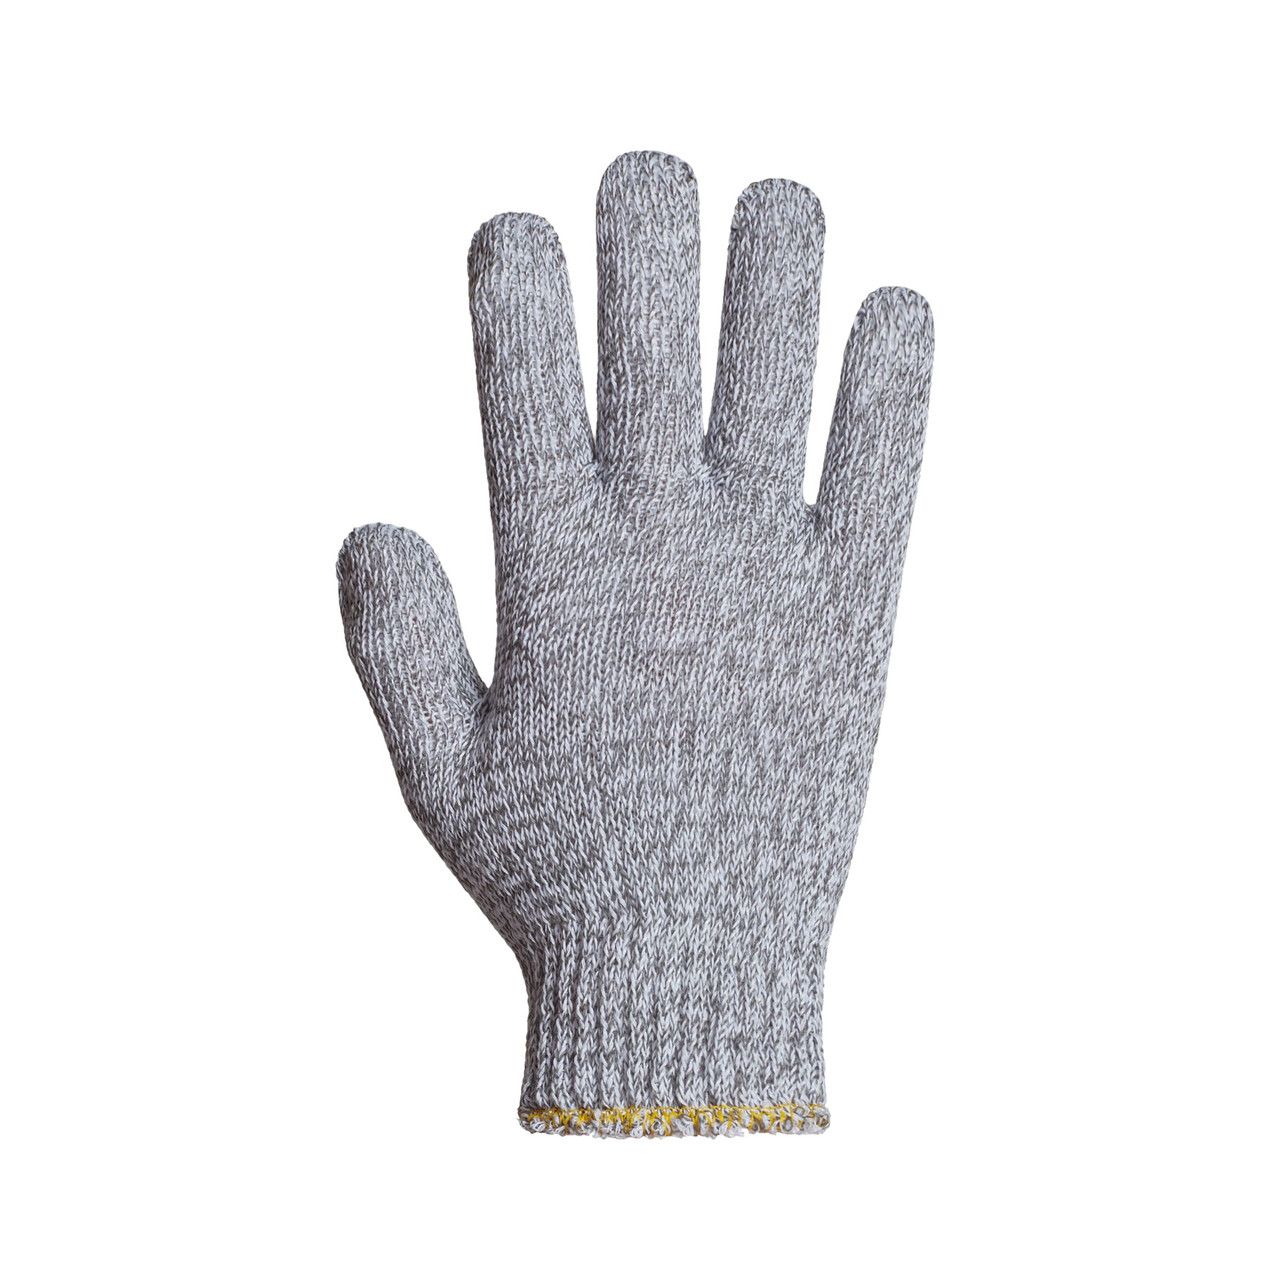 Superior Glove SPGC/A Cool Grip Cut and Heat-Resistant Plastic-Injection Mold-Trimming Gloves, Cut Resistant Glove, A4